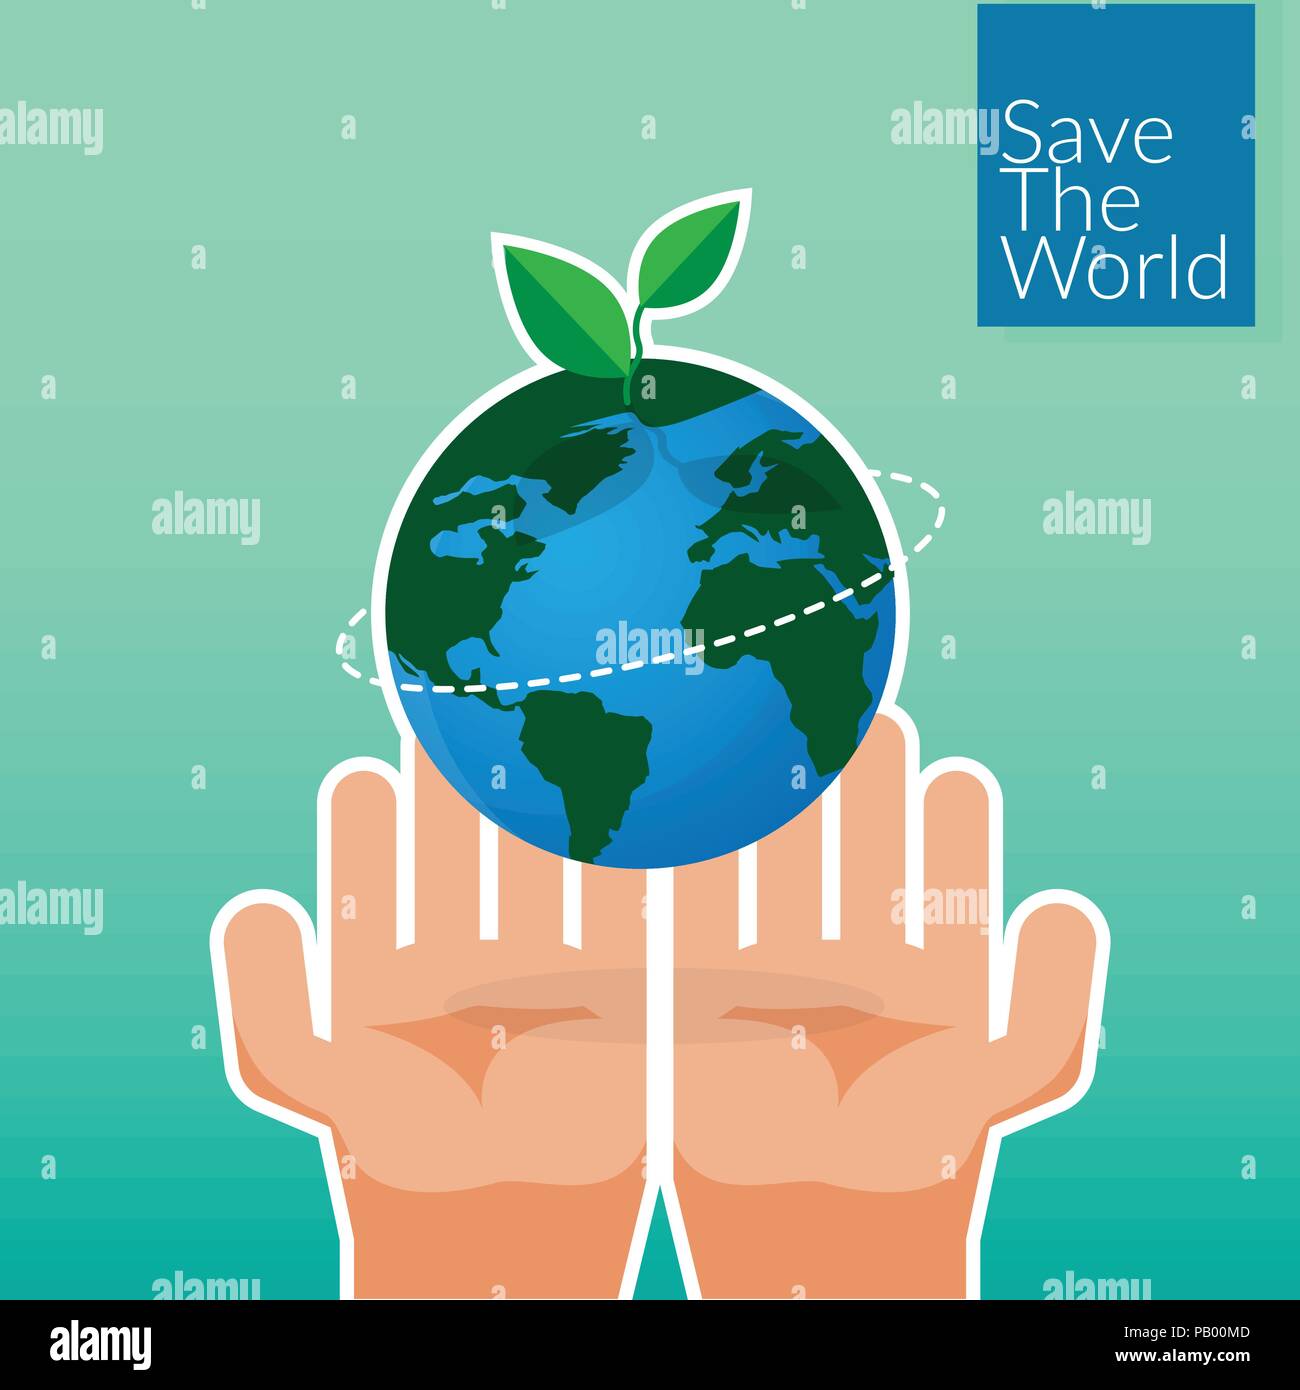 human hands holding Earth, save the world concept. people's volunteer hands planting green globe and tree for saving environment nature conservation a Stock Vector